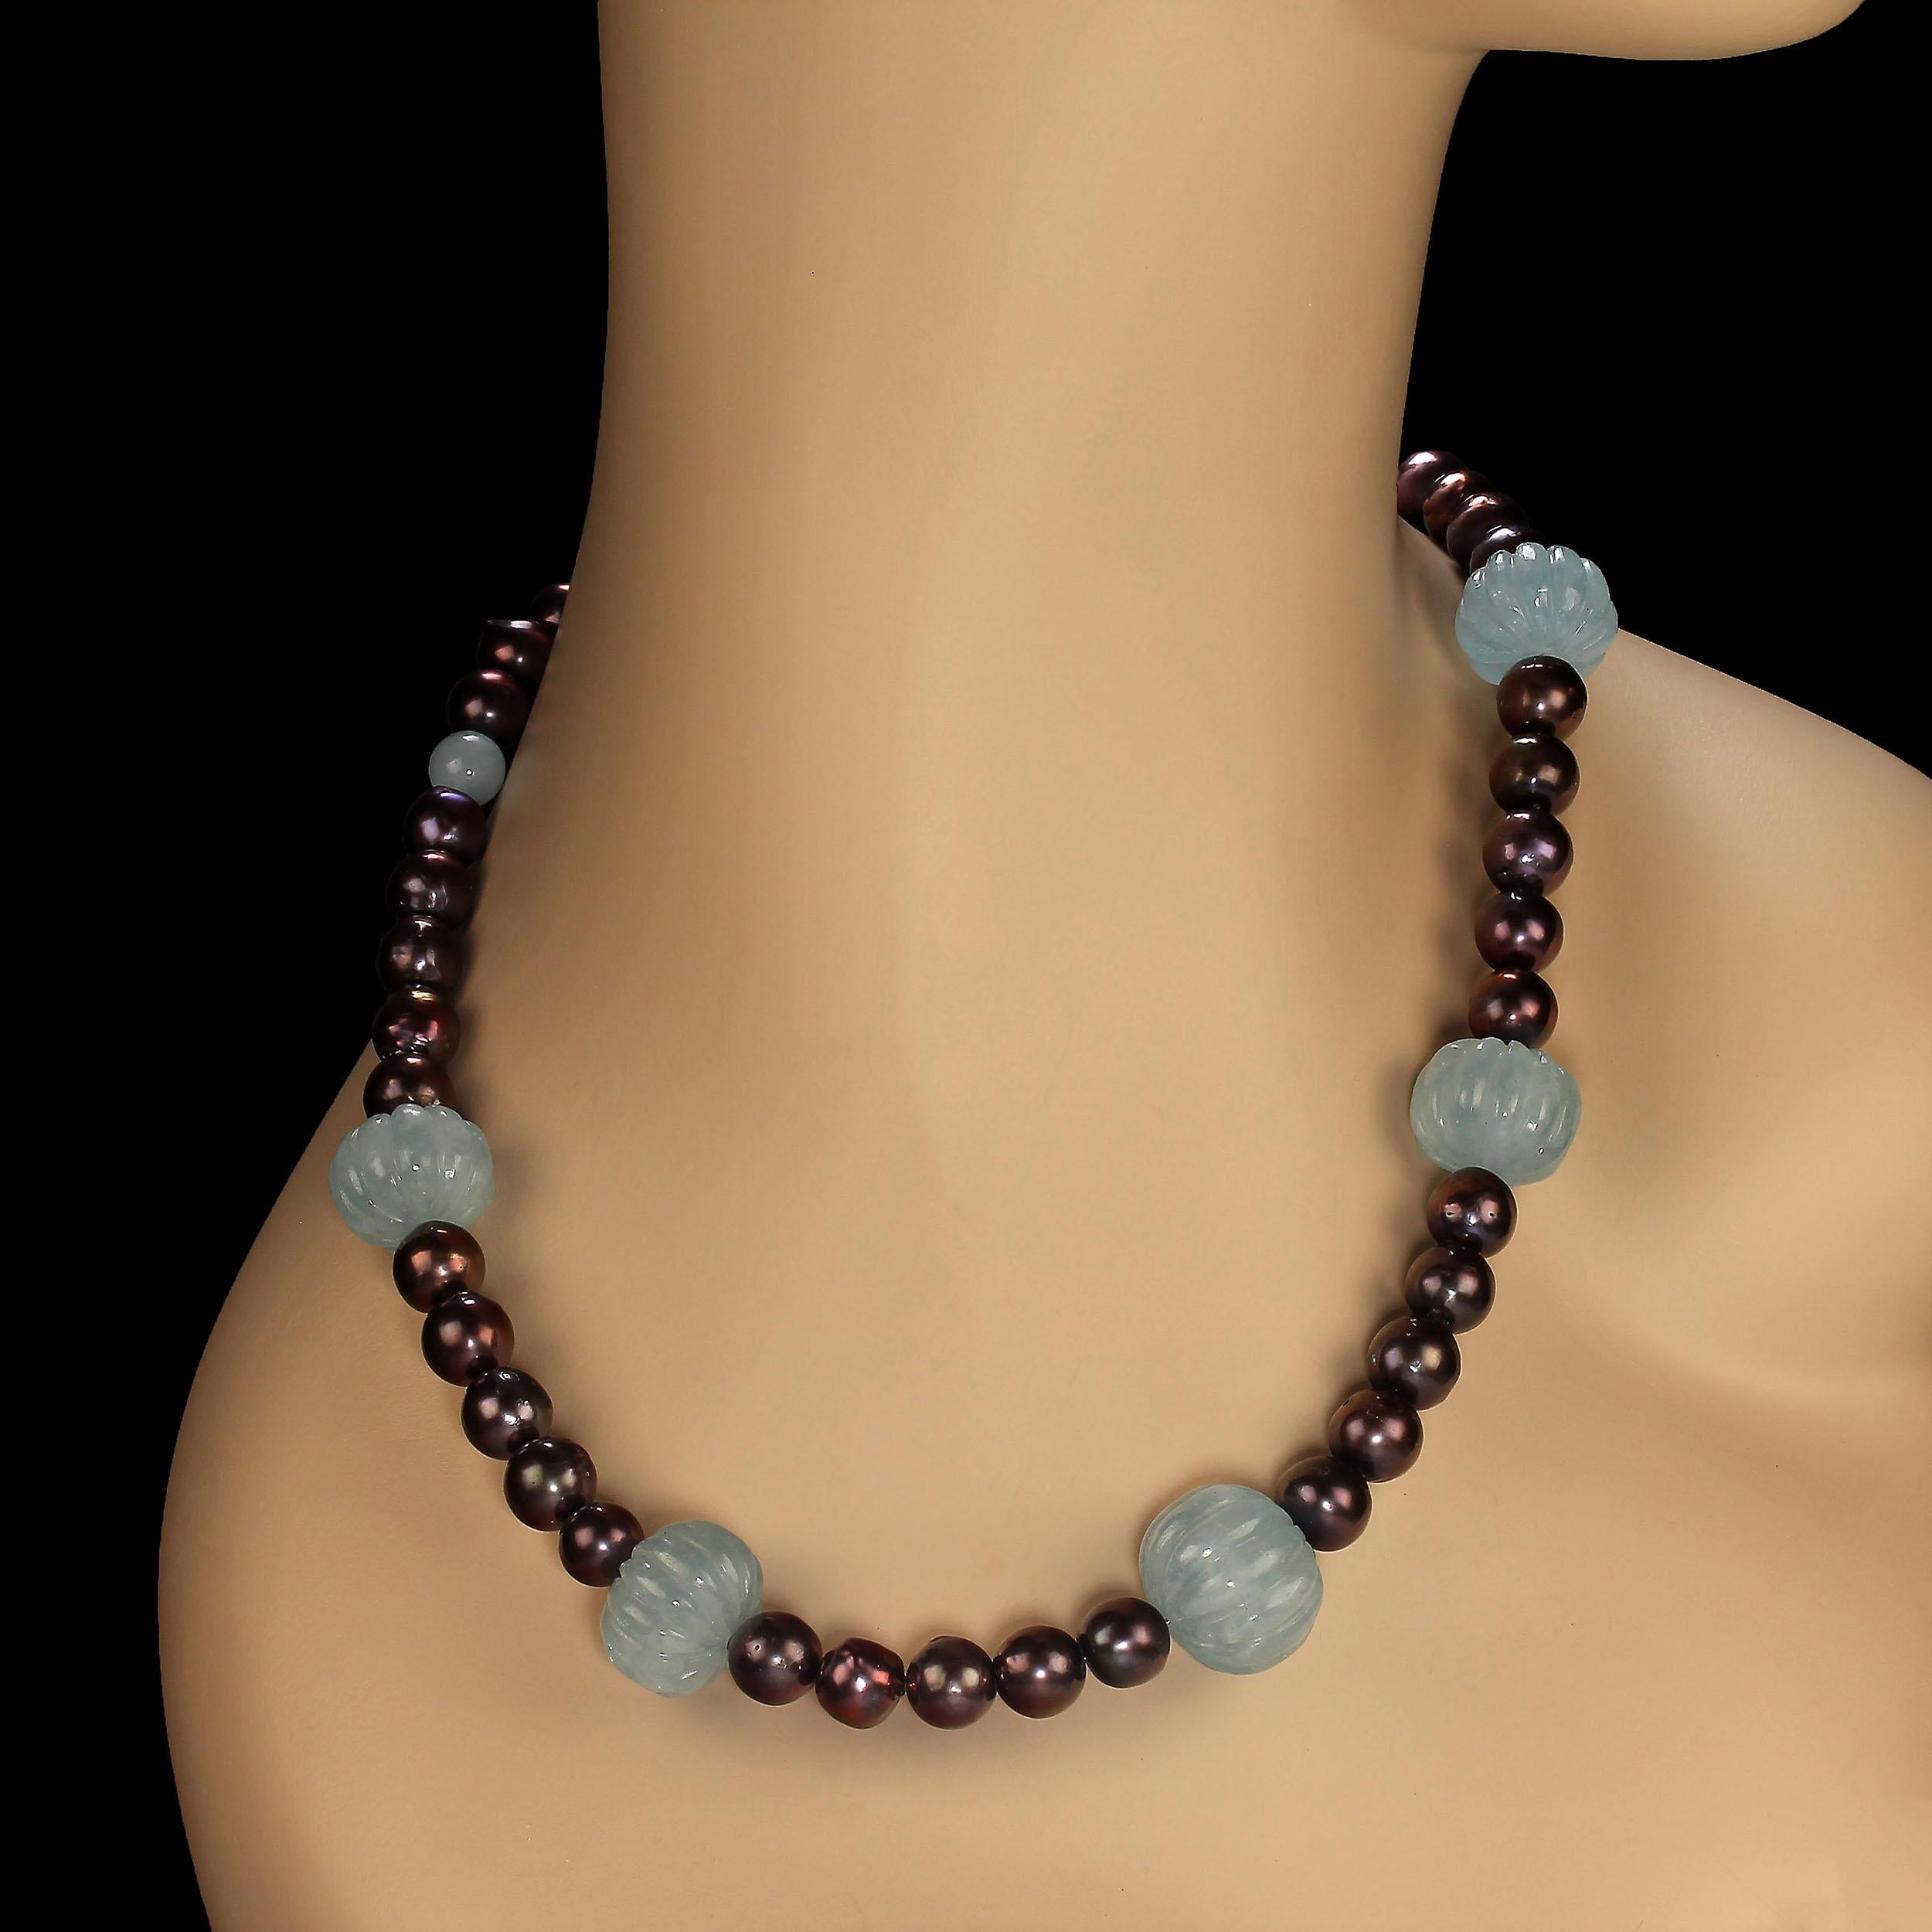 28 Inch Statement necklace featuring glowing brown 10mm pearls with focals of stunning fluted 18 mm aquamarines spaced across the front of the necklace. Additionally, there are 8mm smooth highly polished aquamarines spaced across the sides and back